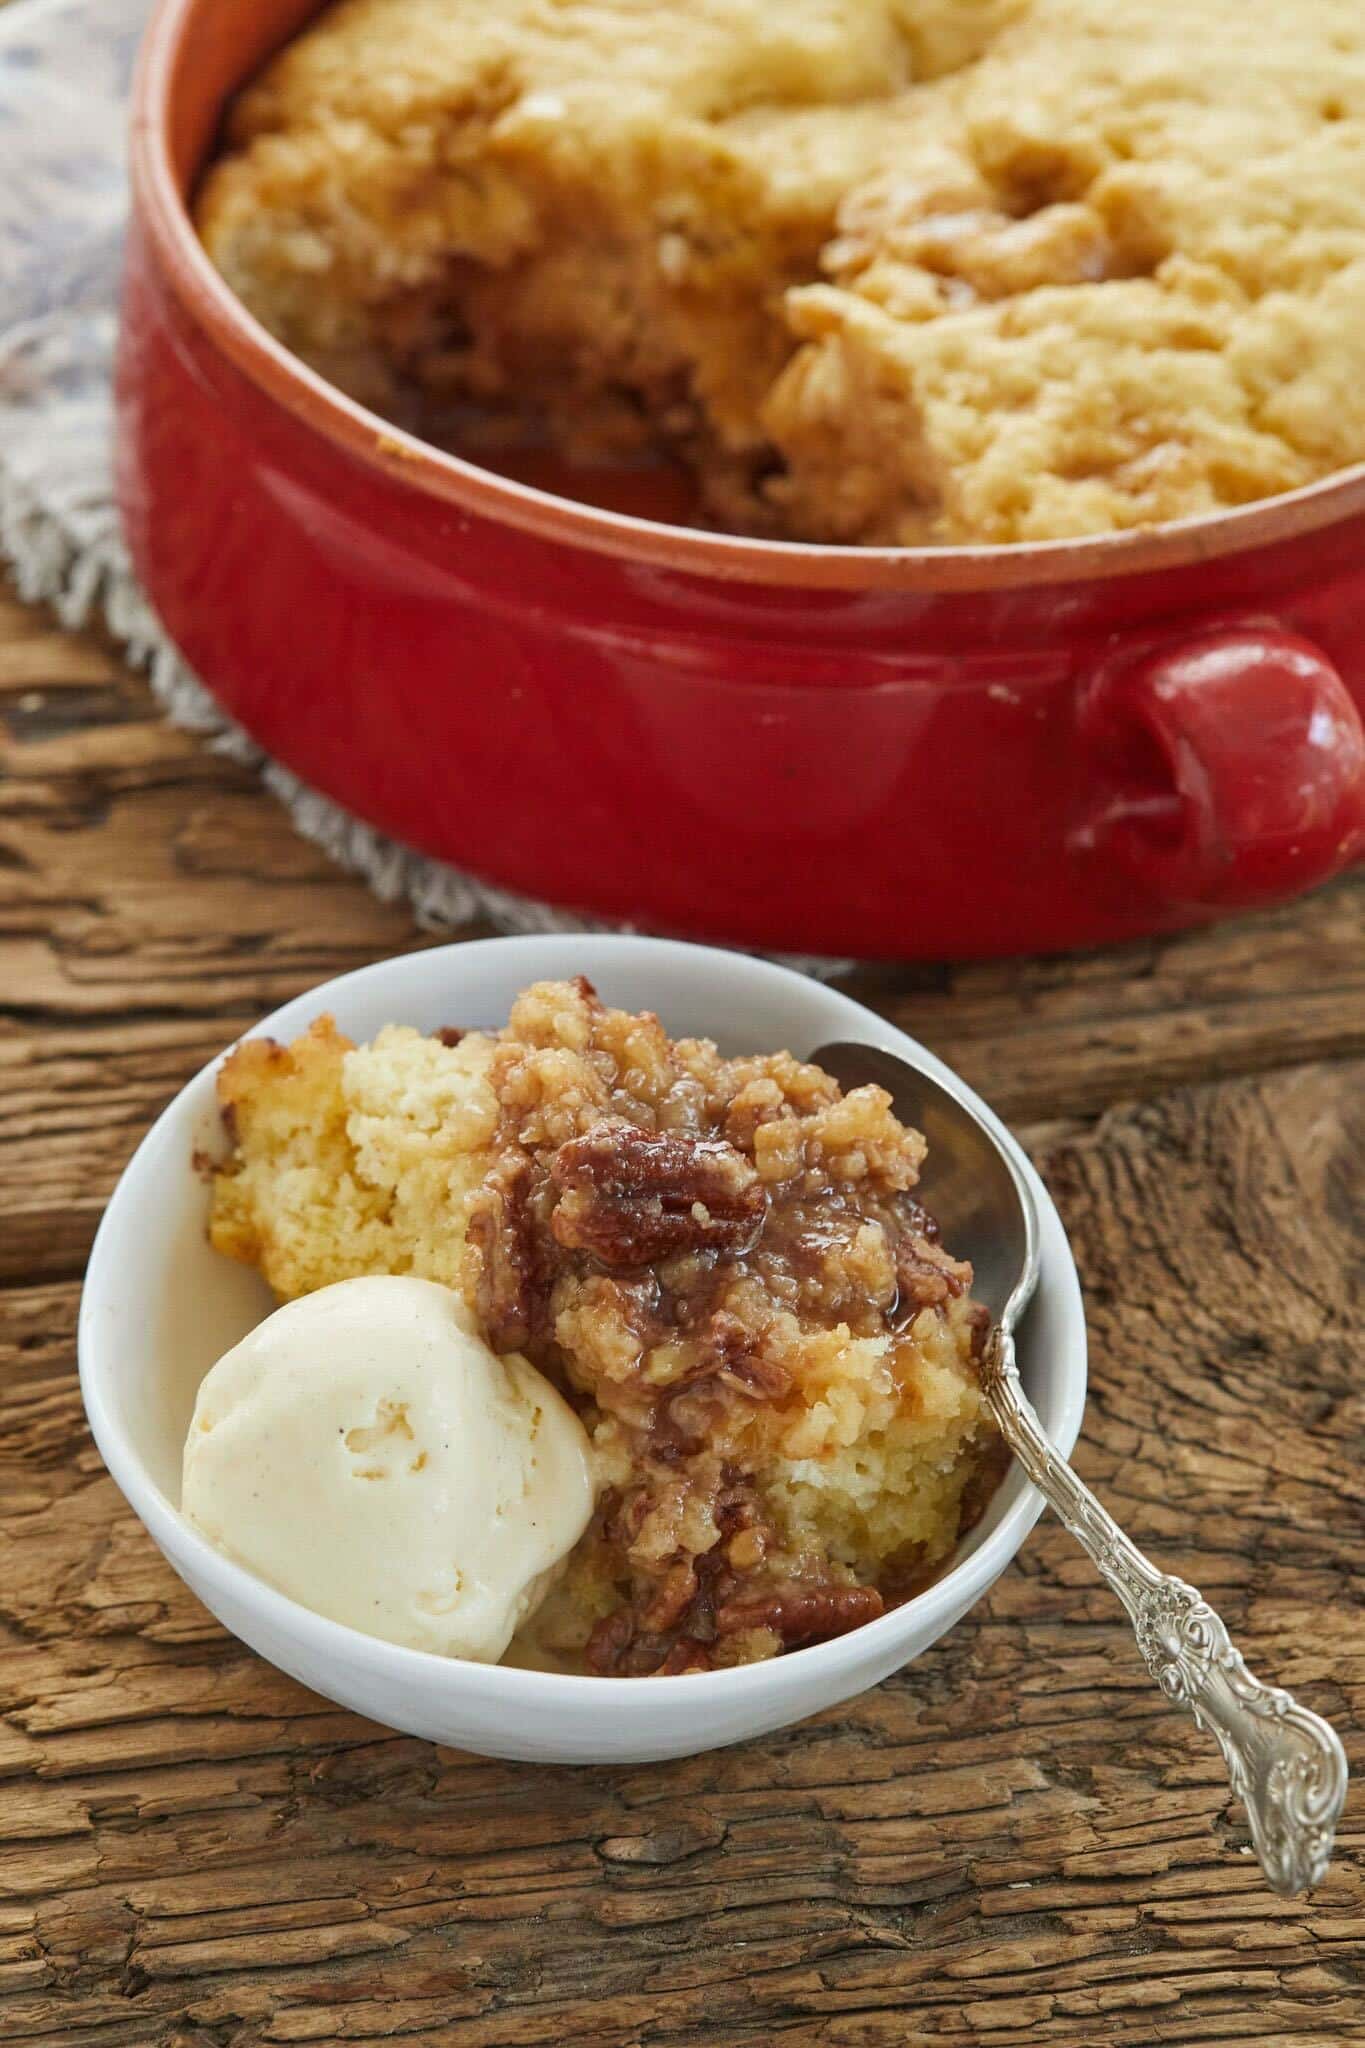 The warm Self-saucing Pecan Cobbler is baked until it the top is golden and the cake is moist and luscious. Another perfection of the Fall Recipes. It's packed with caramelized pecans and in the serving bowl, it's paired with a big scoop of ice cream. 